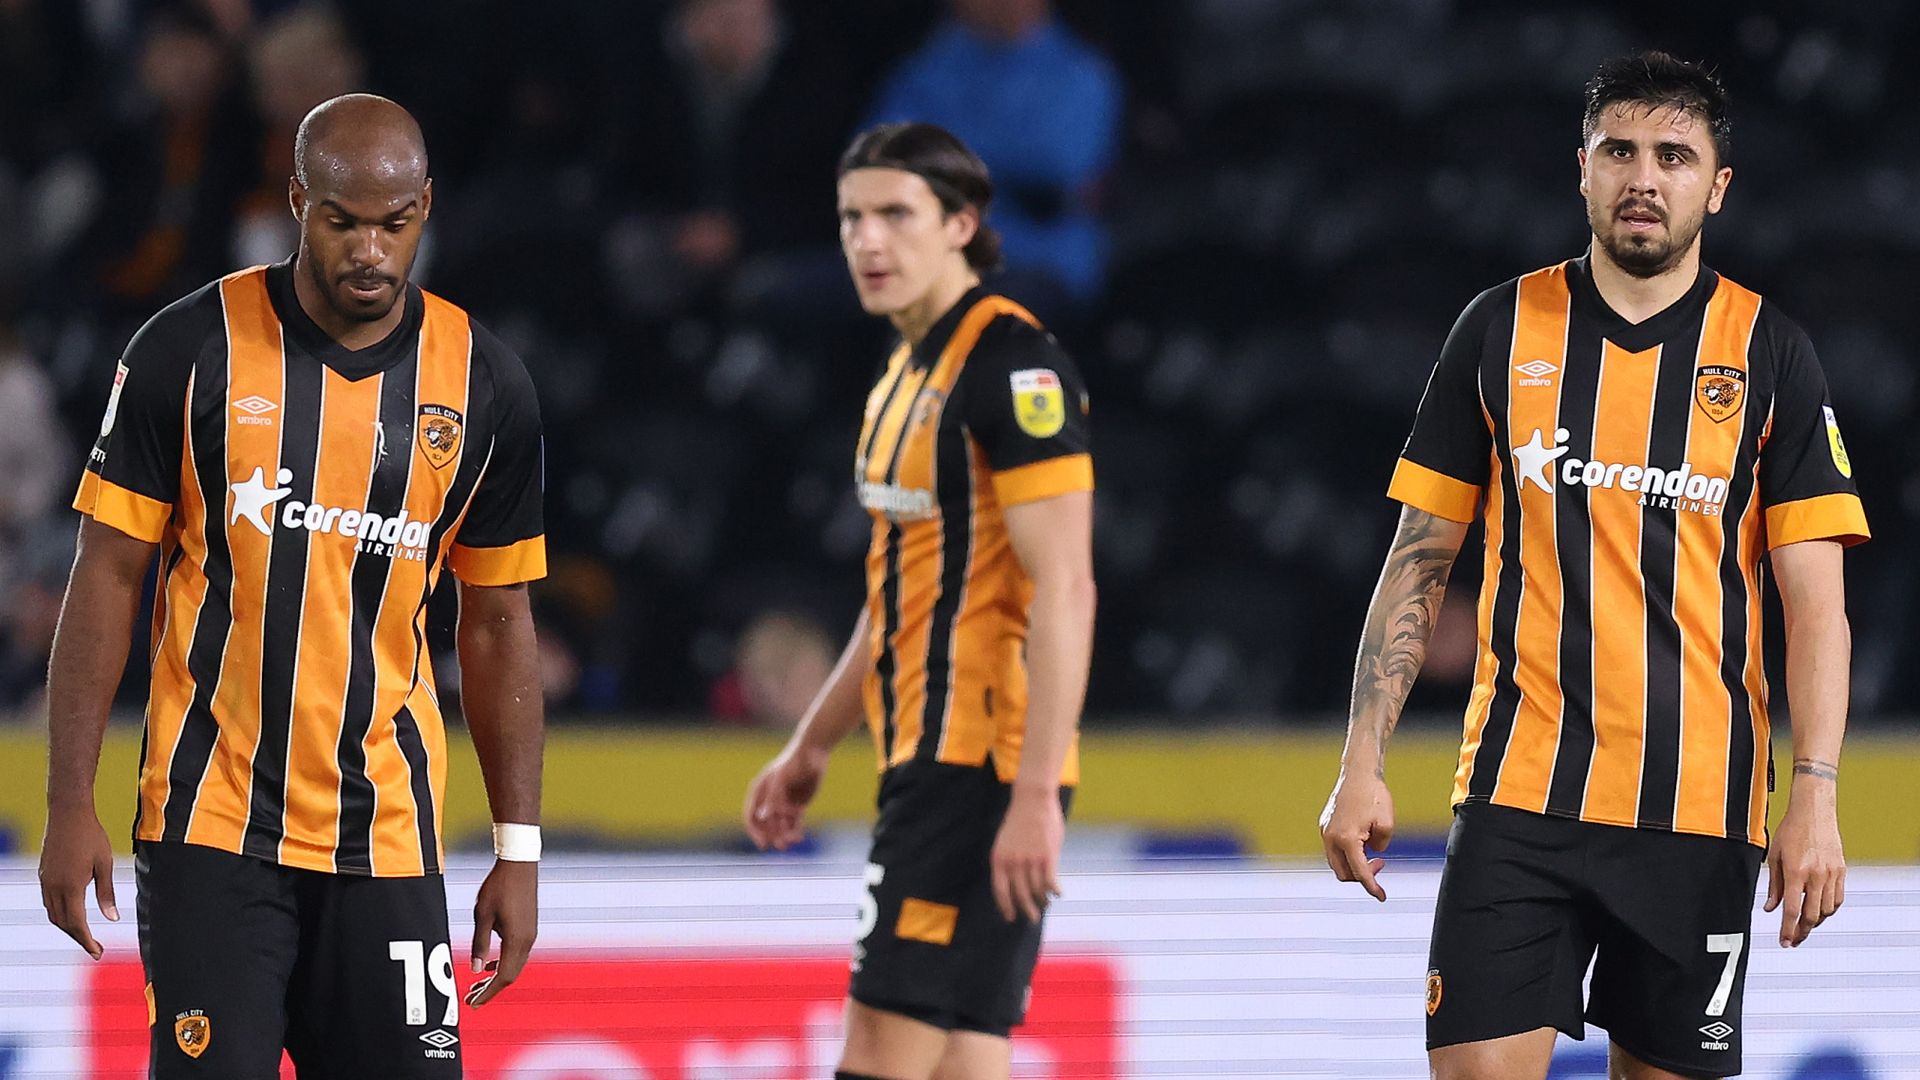 Hull fall to fifth straight defeat hours after Arveladze sacking